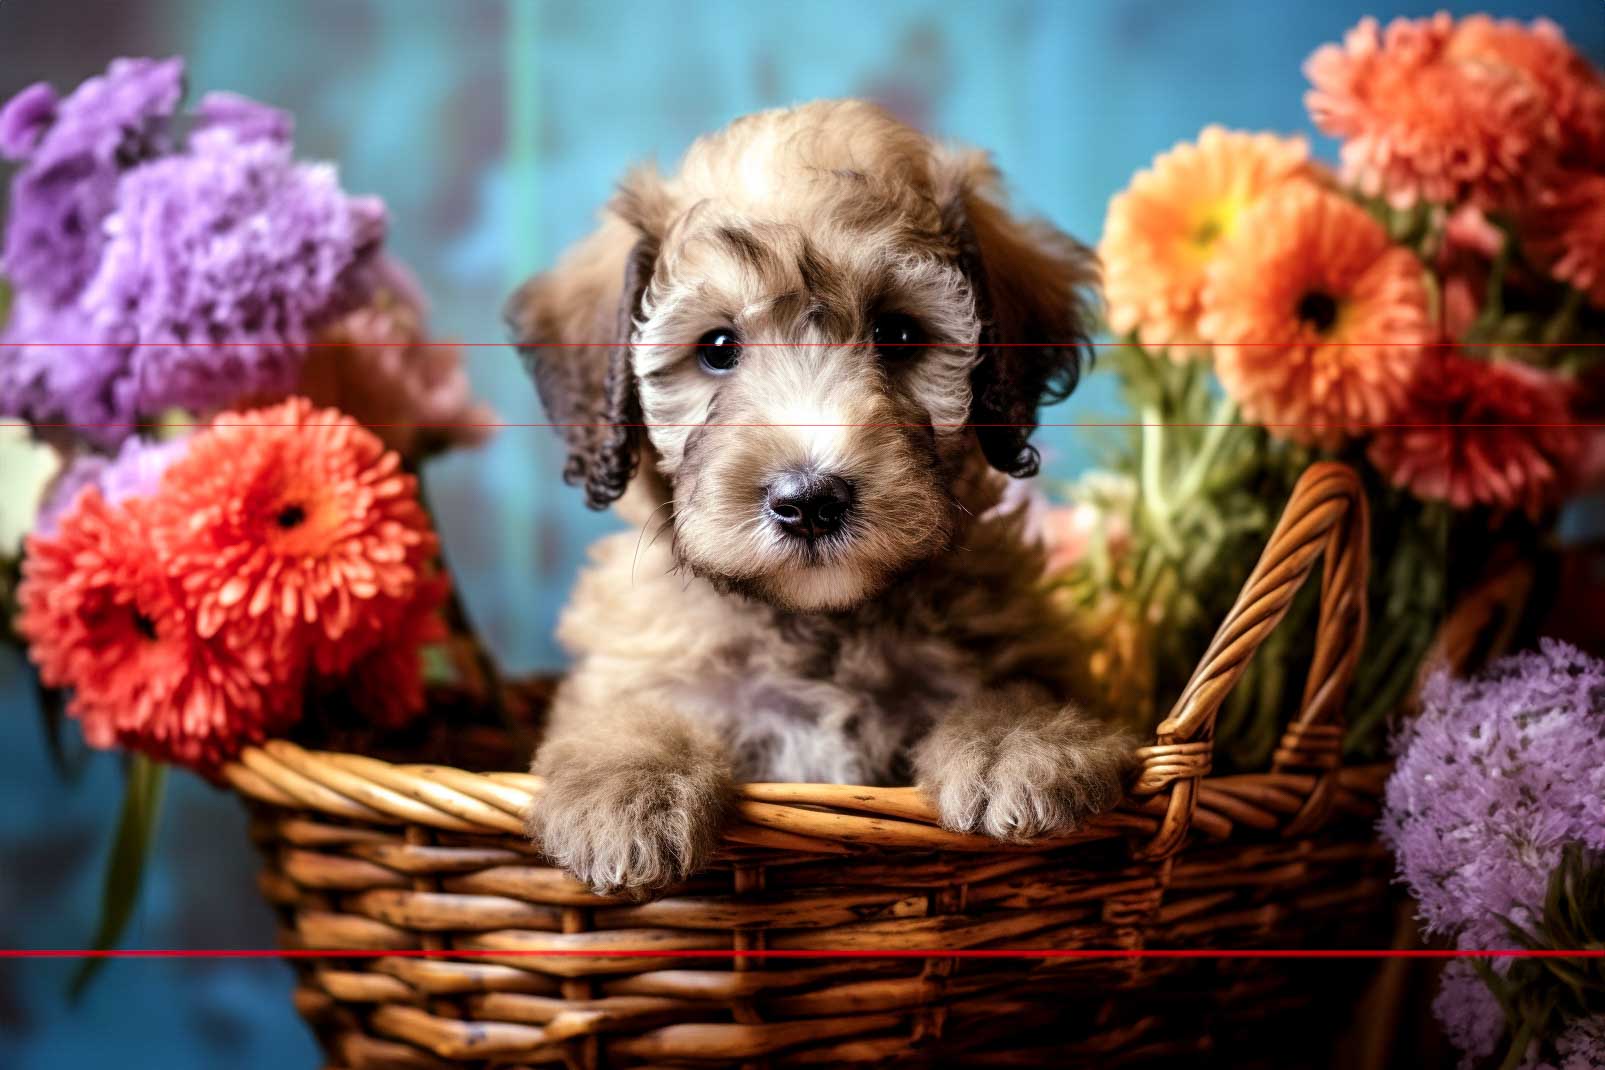 In this picture, a Wheaten Terrier puppy with fluffy brownish fur sits in a wicker basket surrounded by colorful flowers. The flowers include purple, orange, and pink blooms, creating a vibrant contrast with the puppy's soft fur. The background is blurred in shades of blue.